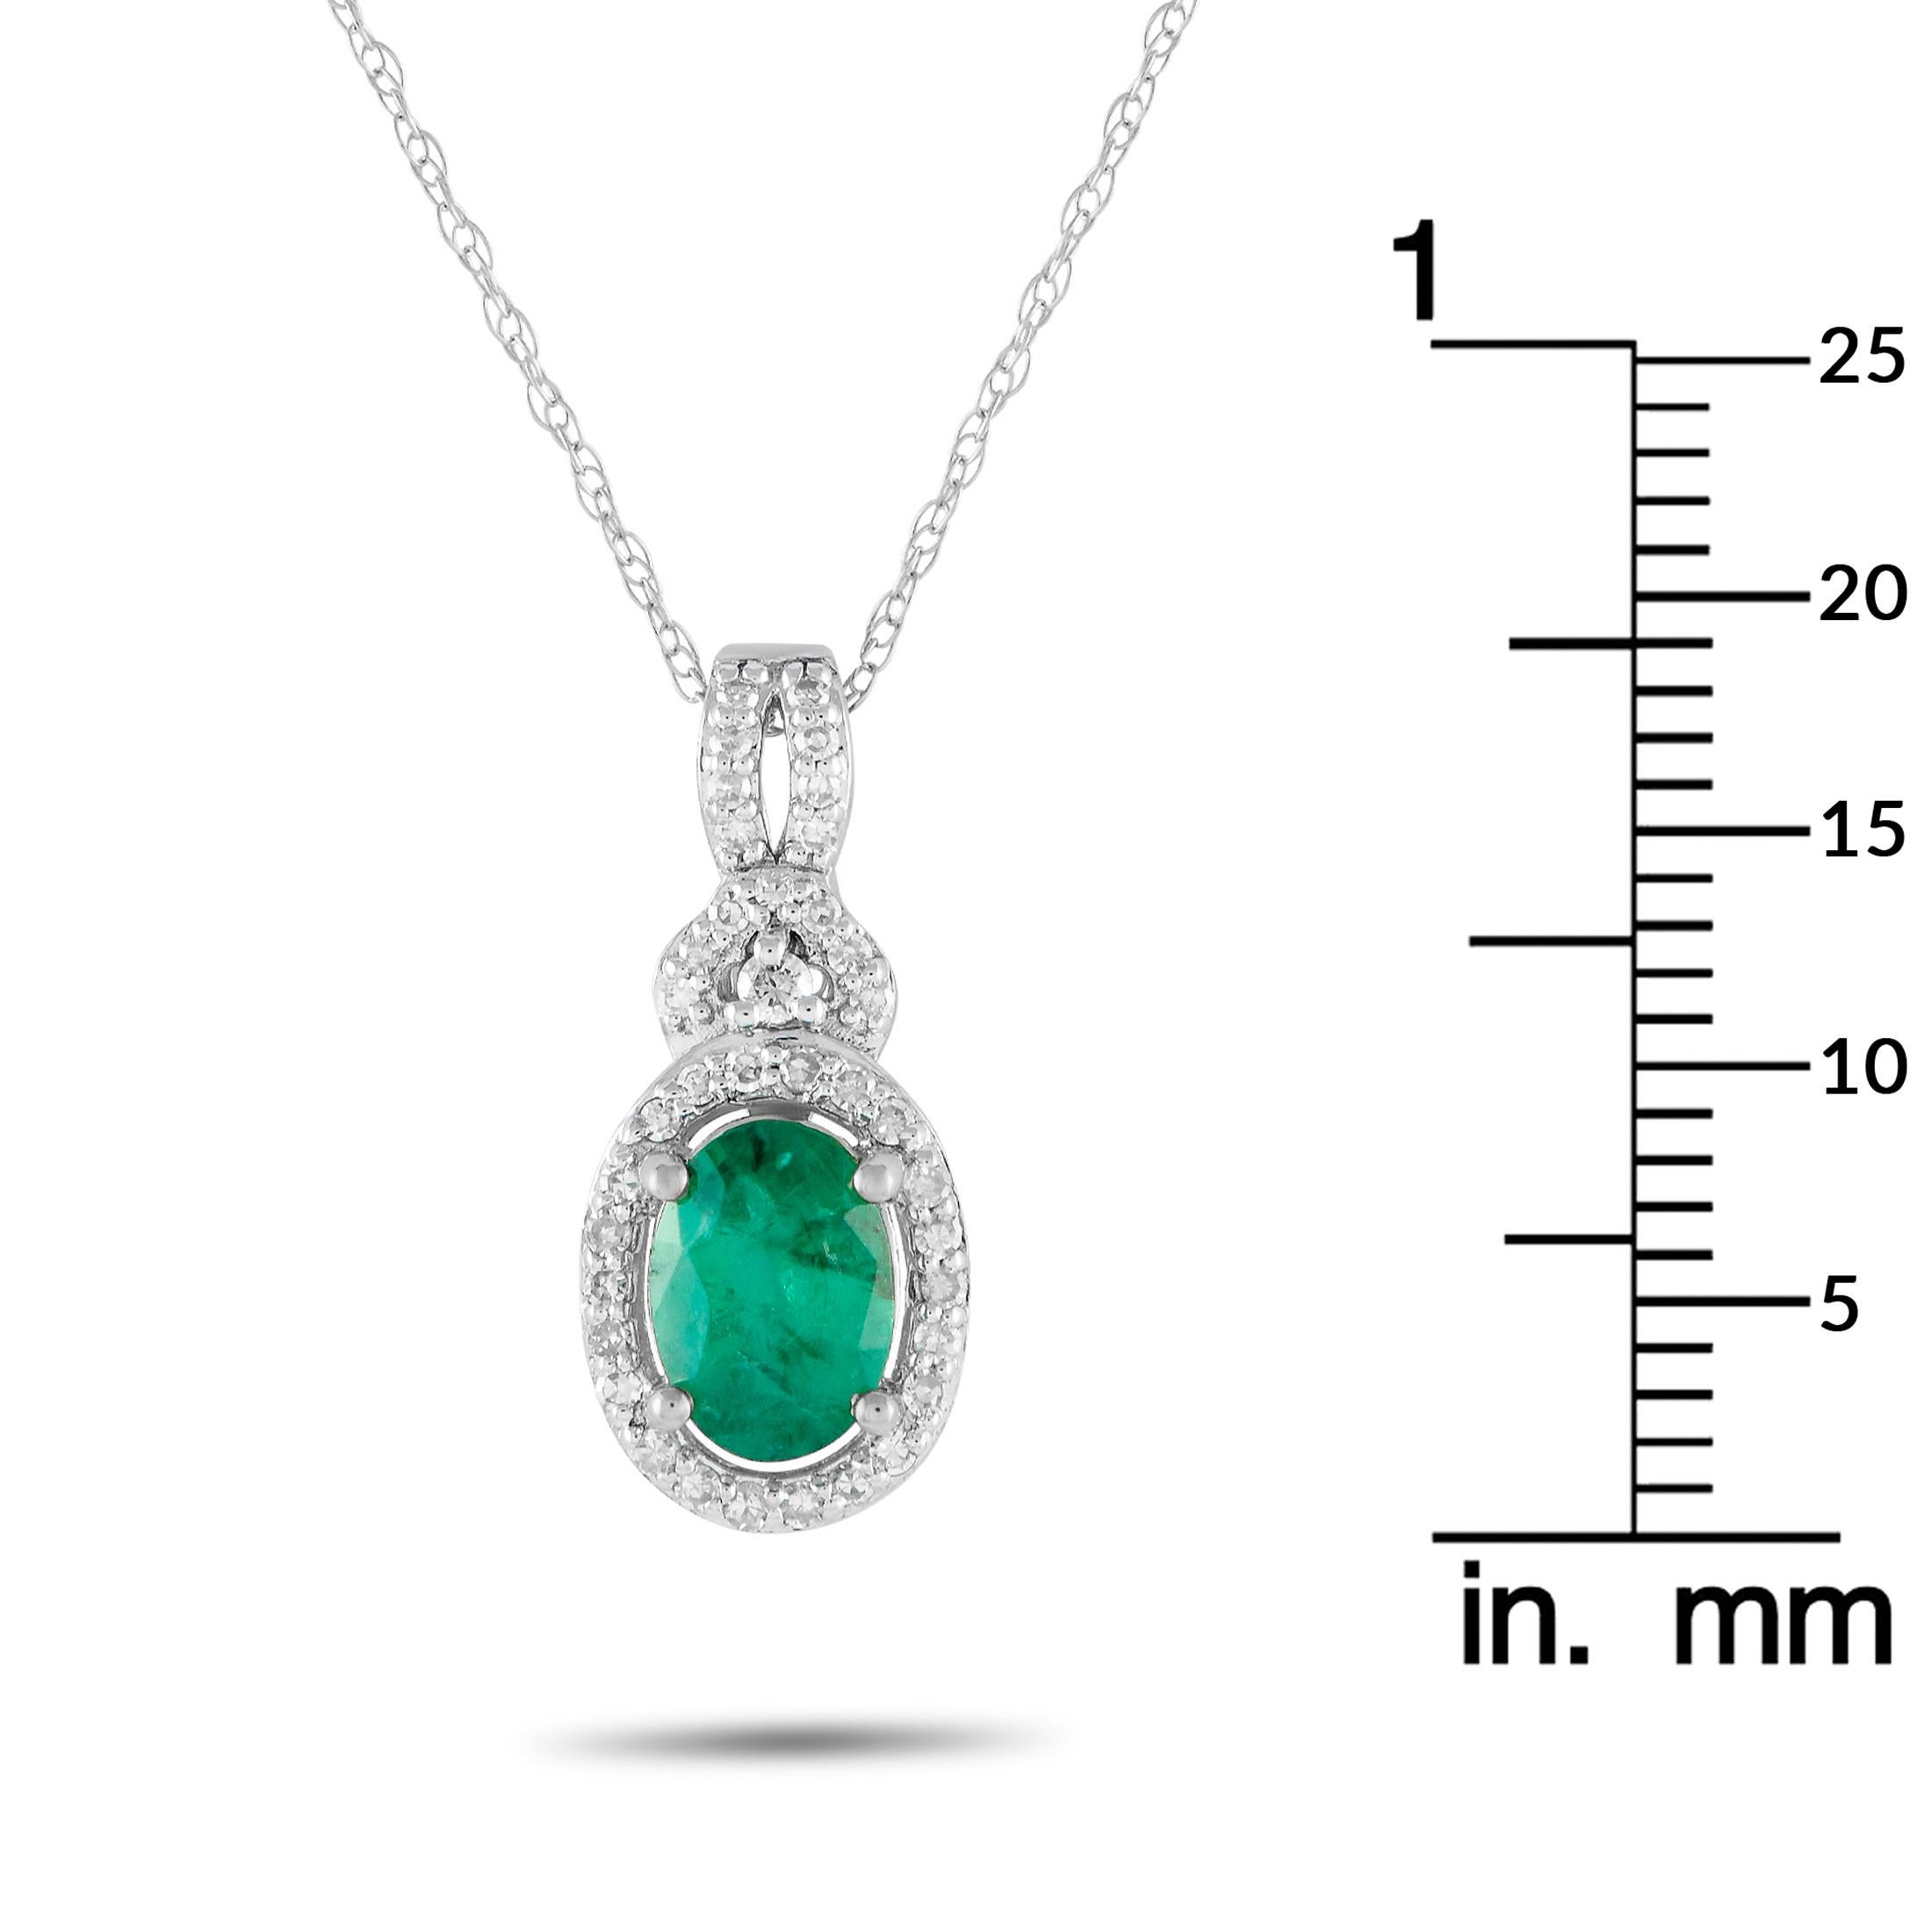 LB Exclusive 14K White Gold 0.15ct Diamond and Emerald Necklace PD4-15738WEM In New Condition For Sale In Southampton, PA